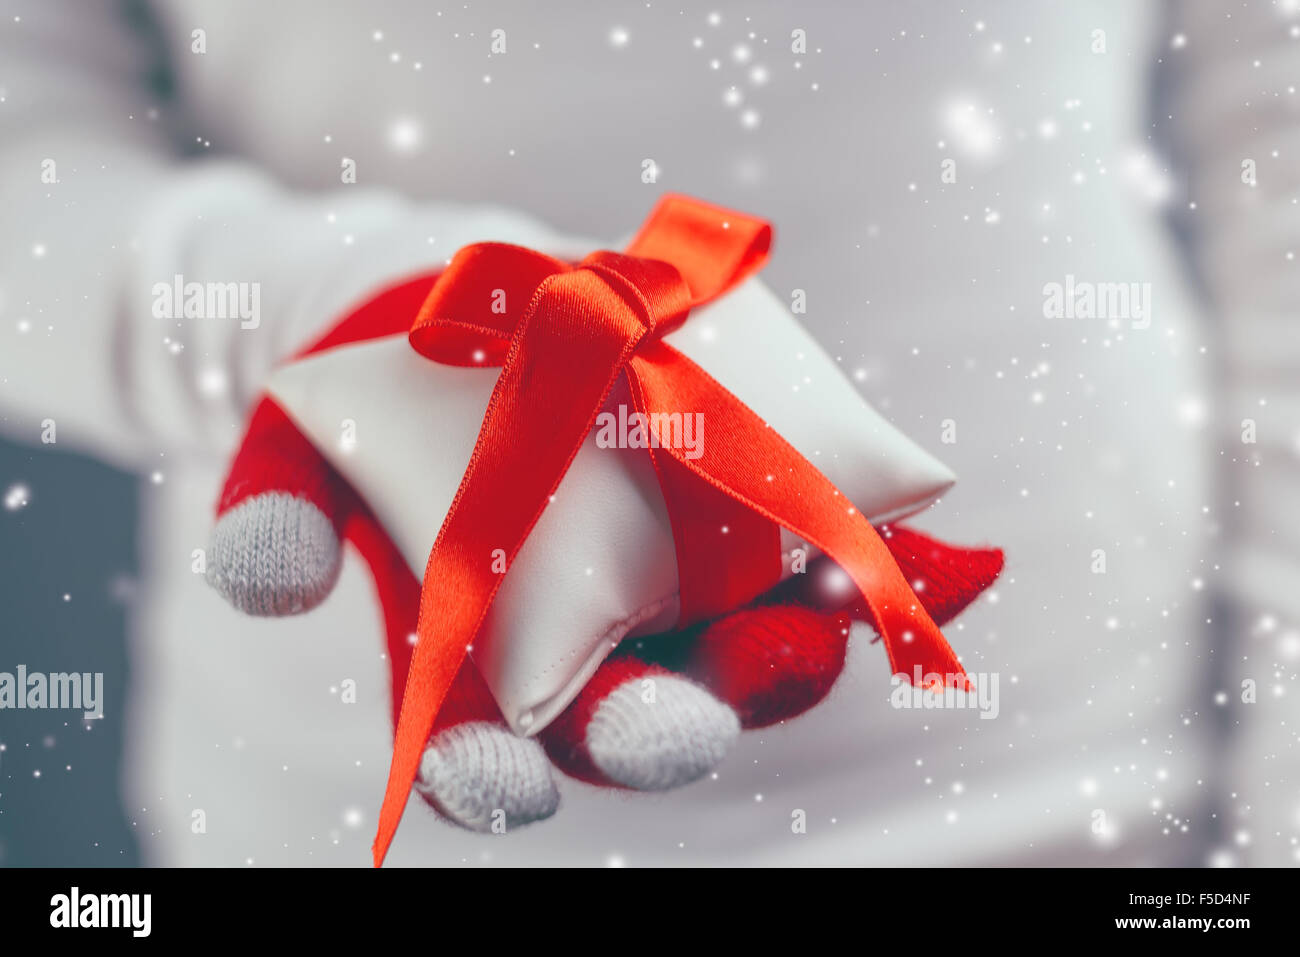 Woman giving Christmas gift wrapped with red ribbon decoration, holiday season with snowflakes falling, retro toned image with s Stock Photo